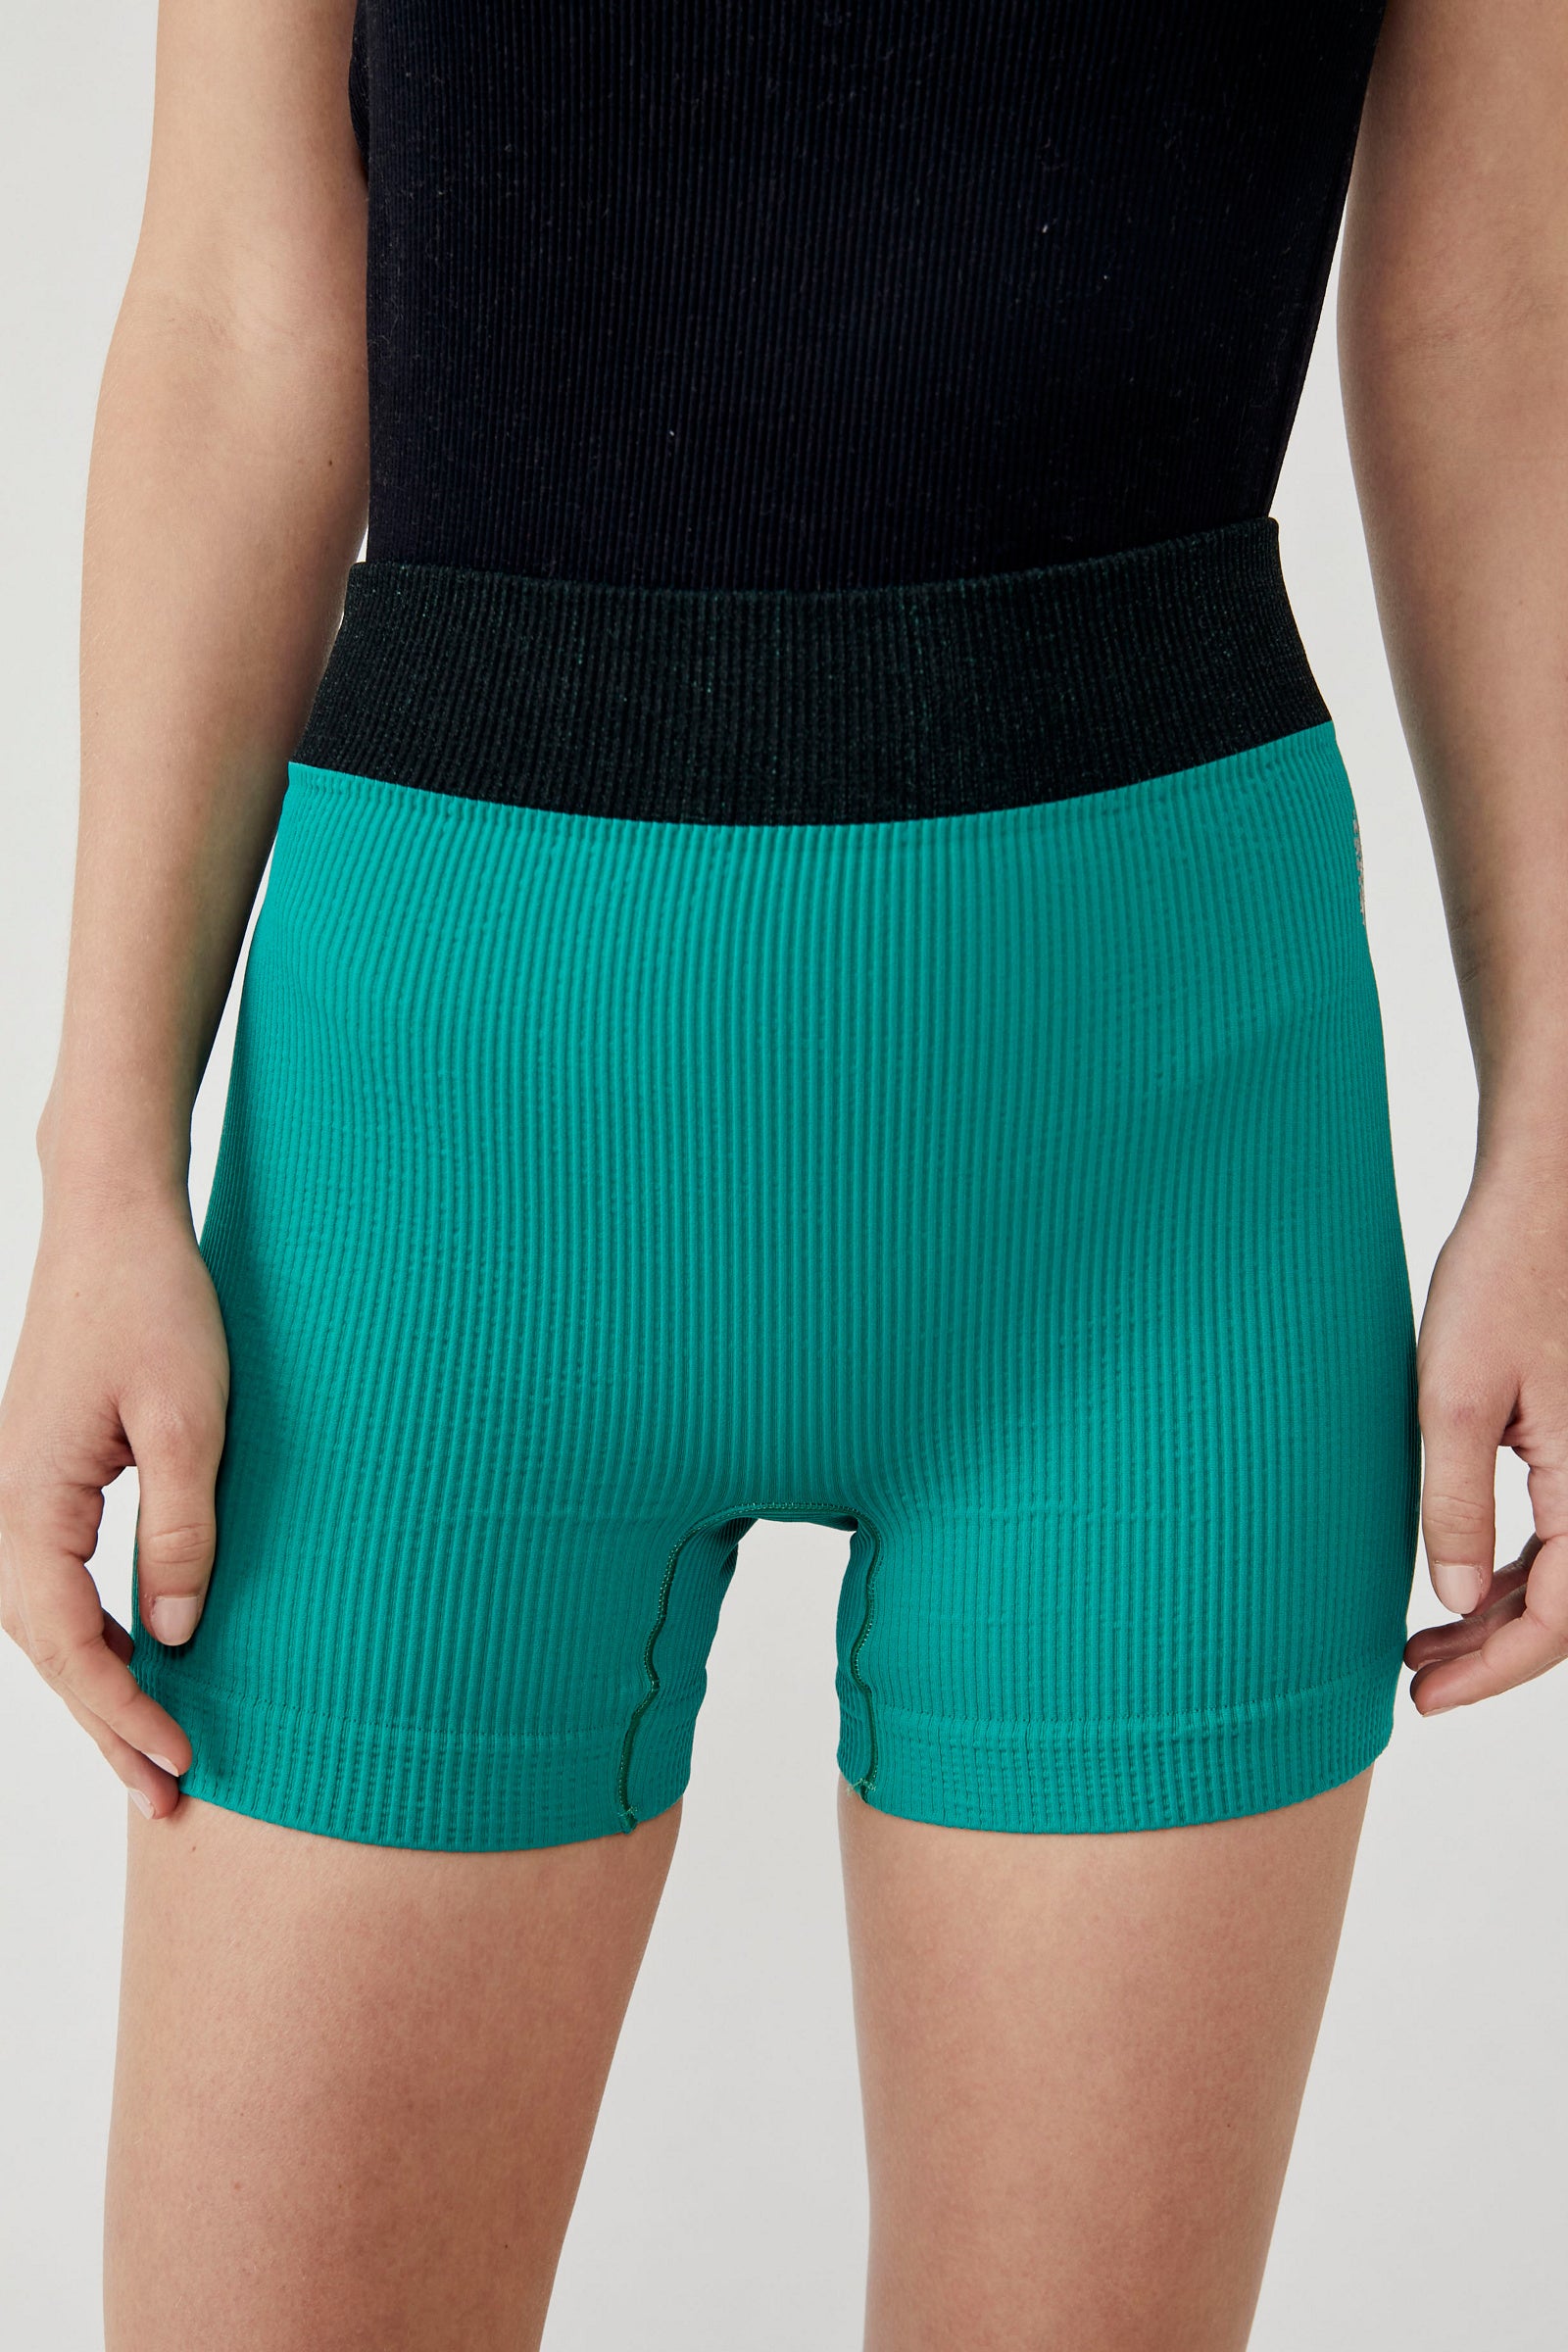 FREE PEOPLE MOVEMENT SEAMLESS SHORT - GREEN TEAL 2566 – Work It Out